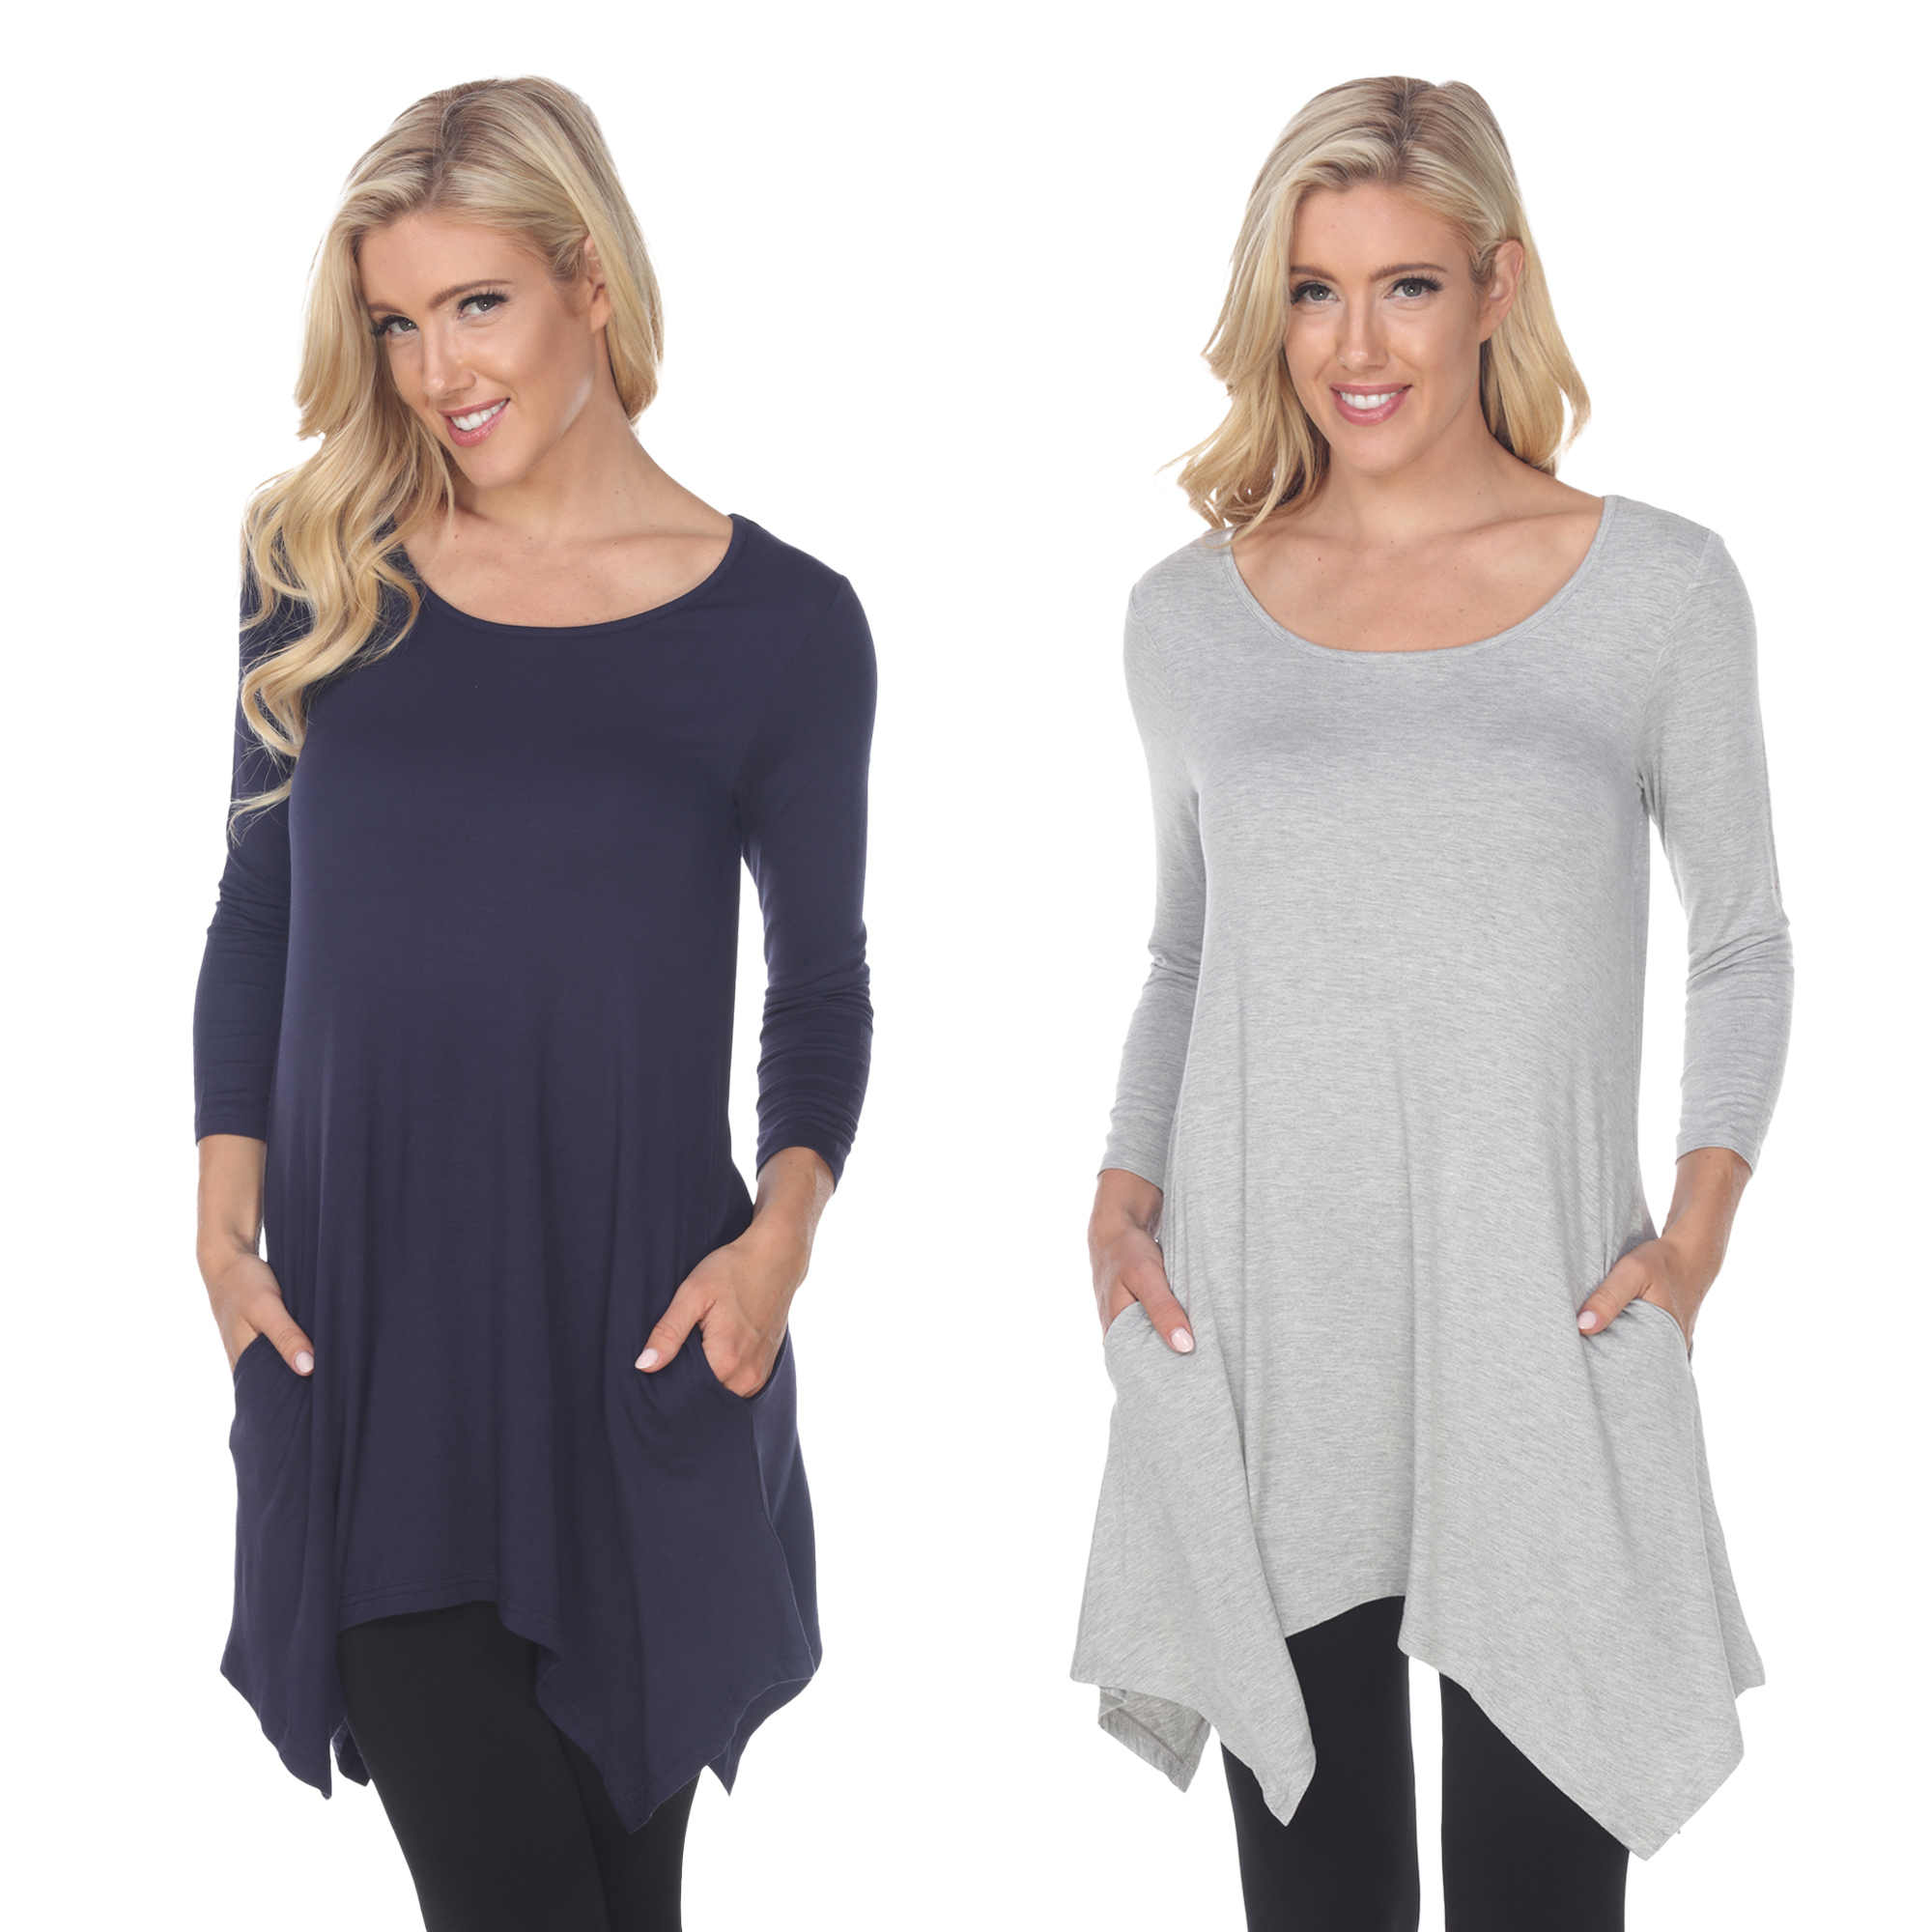 White Mark Women's Pack Of 2 Navy Tunic Top - Navy, Heather Grey, X-Large